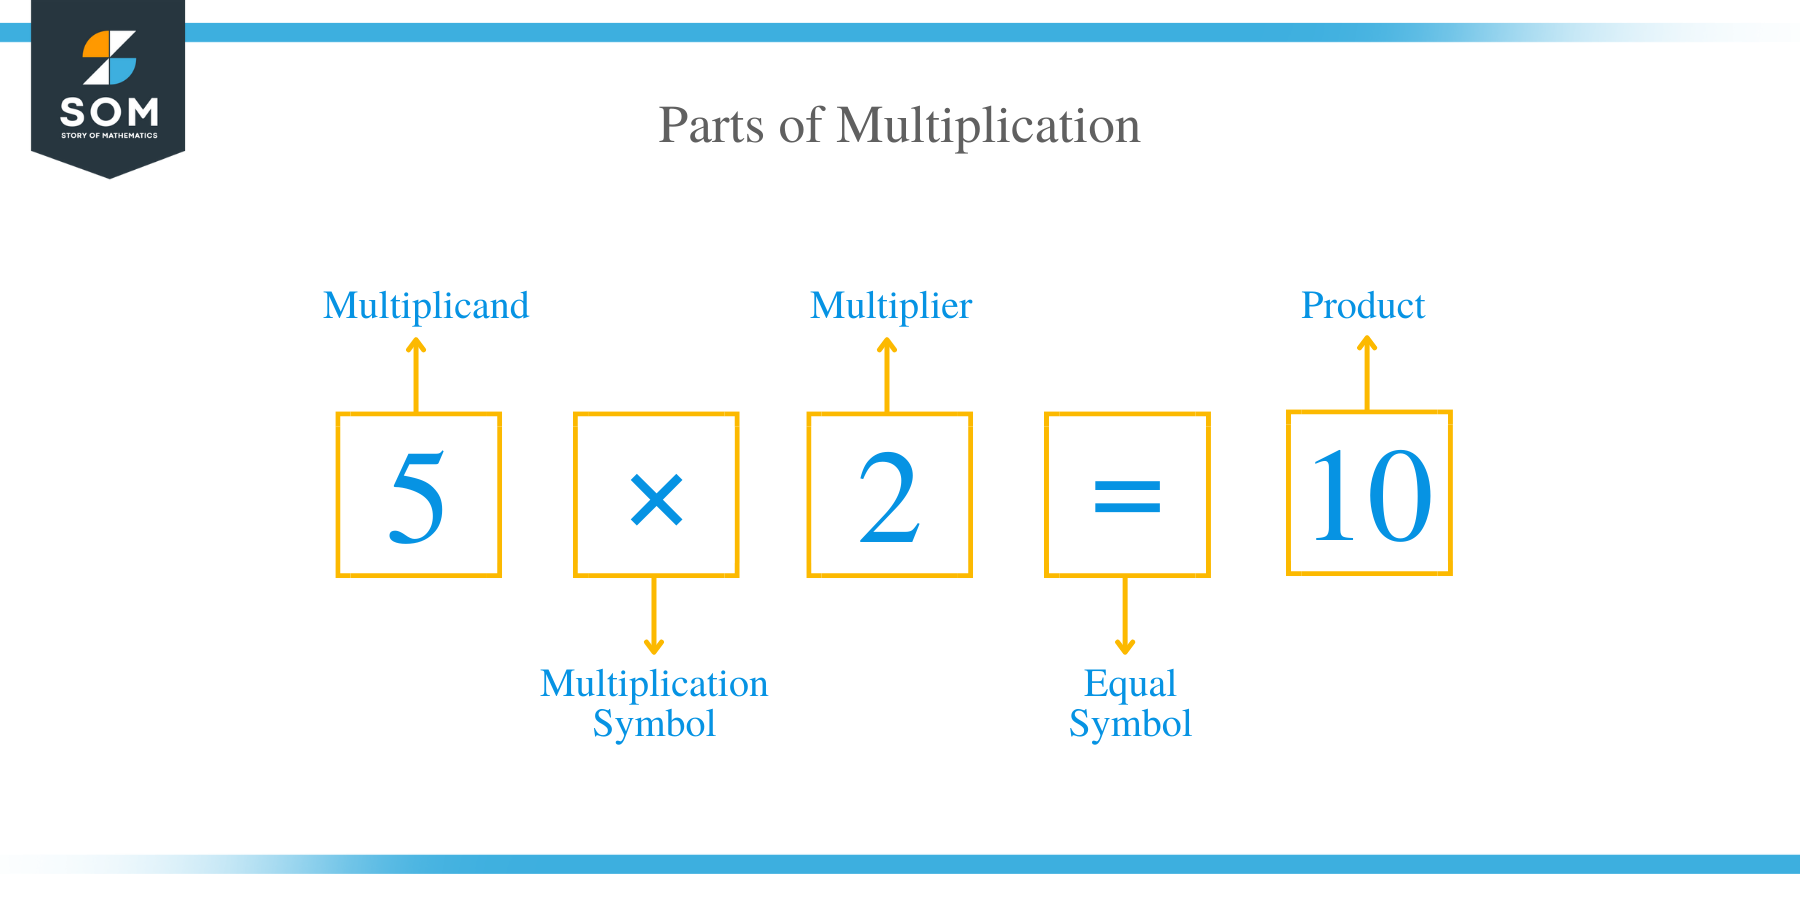 Parts of Multiplication